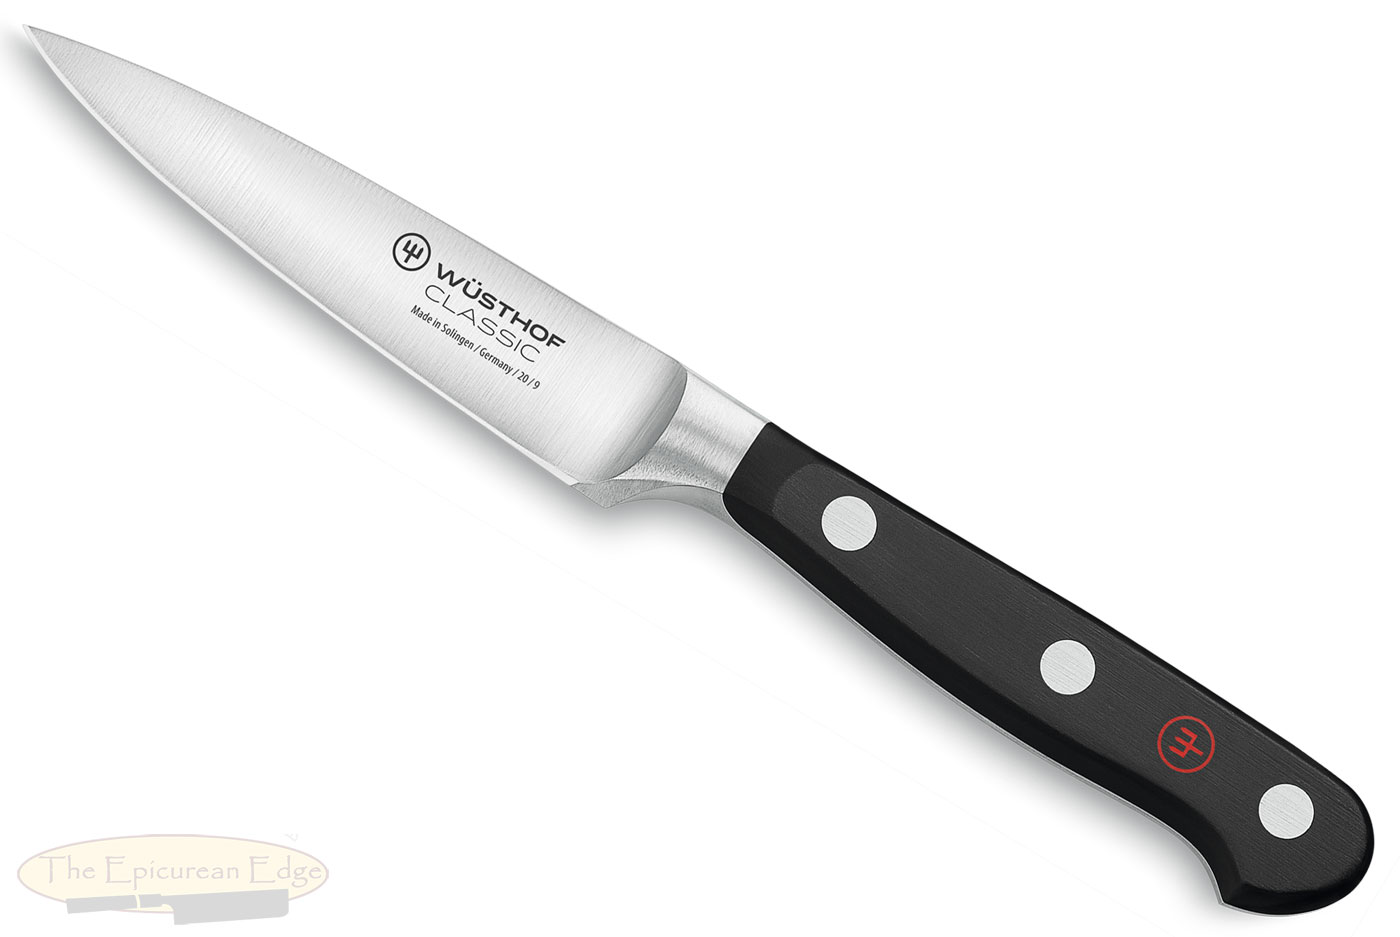 Wusthof-Trident Classic Paring Knife - 3-1/2 in. (1041010409)